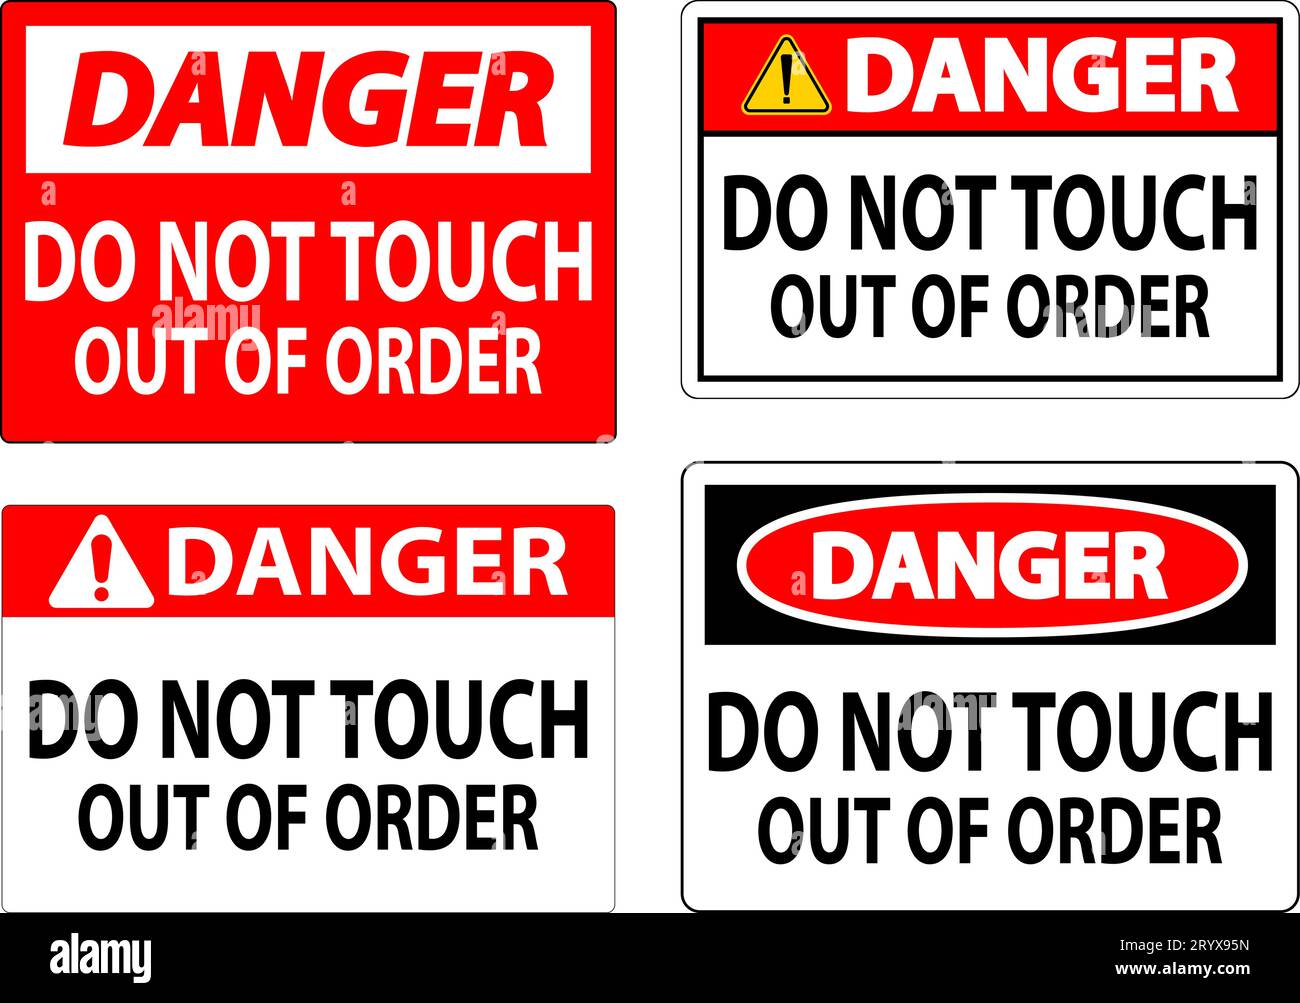 Danger Sign Do Not Touch - Out Of Order Stock Vector